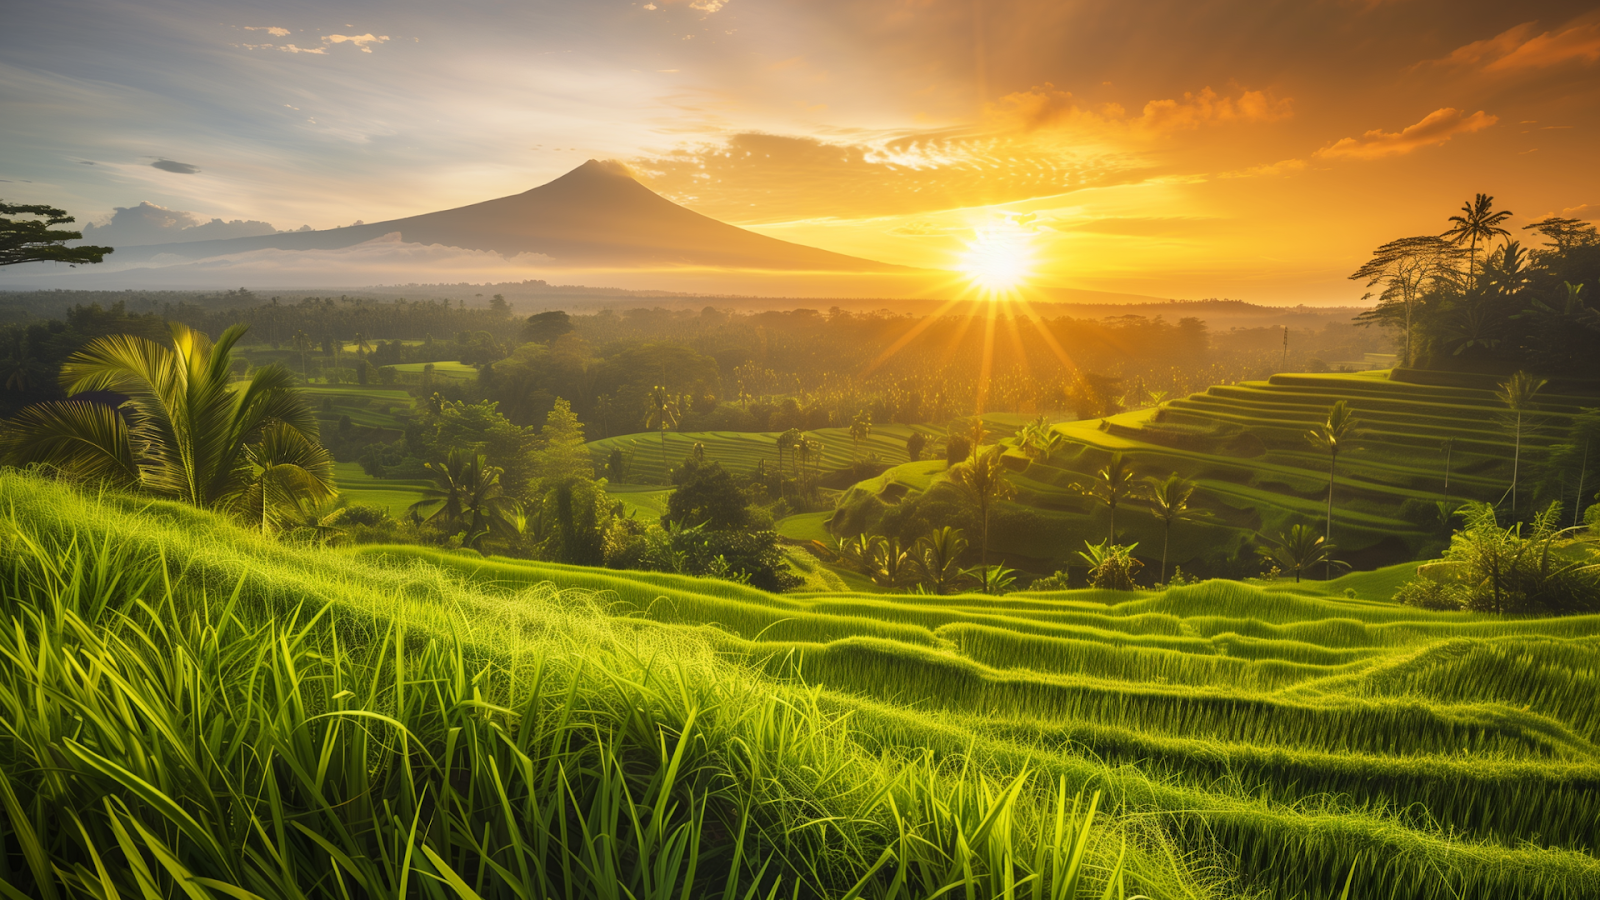 Golden sunrise illuminating the lush rice terraces of Ubud, Bali, with Mount Agung in the distance, highlighting Bali's natural and cultural beauty.